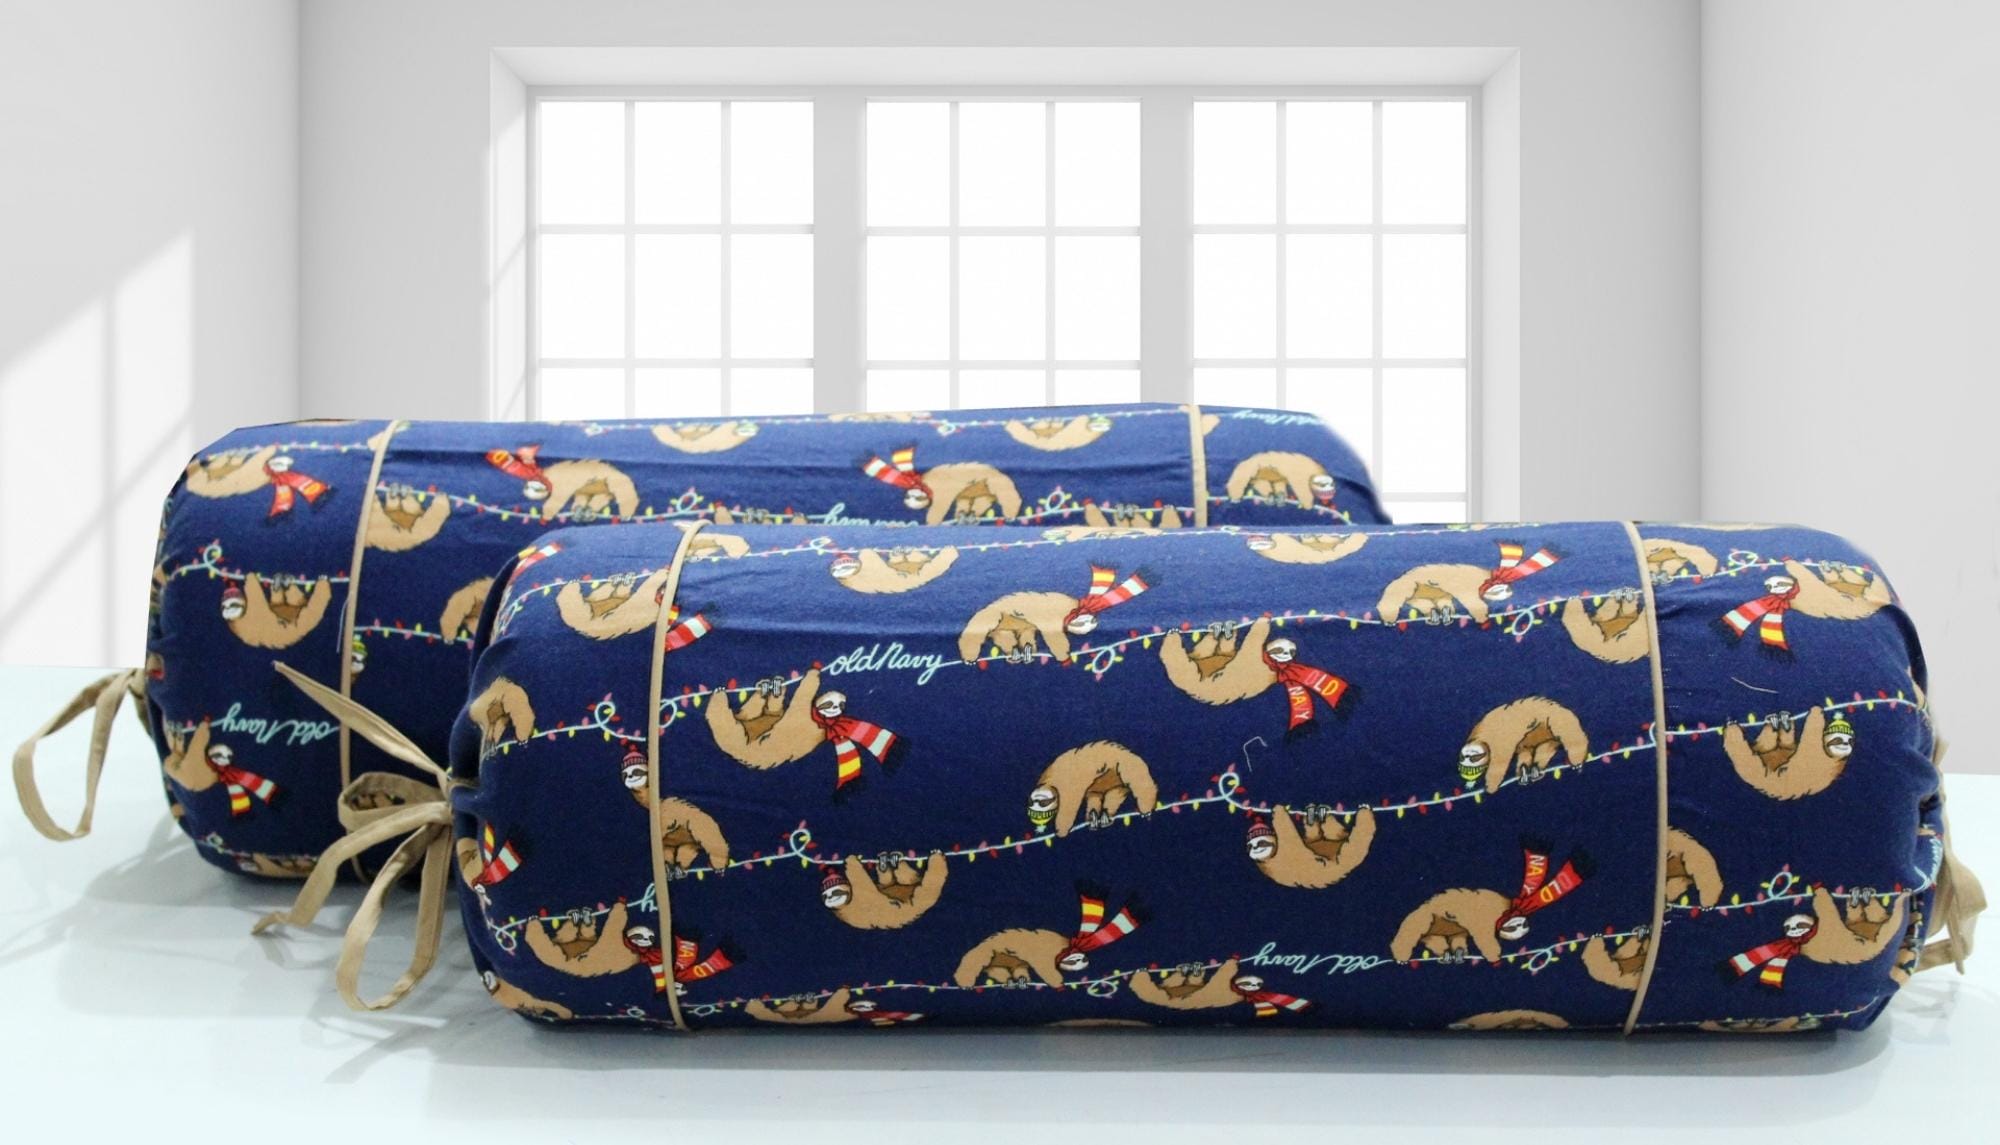 Cotton Funky Printed Flannel Bolster Cover Set at best prices-2pcs 